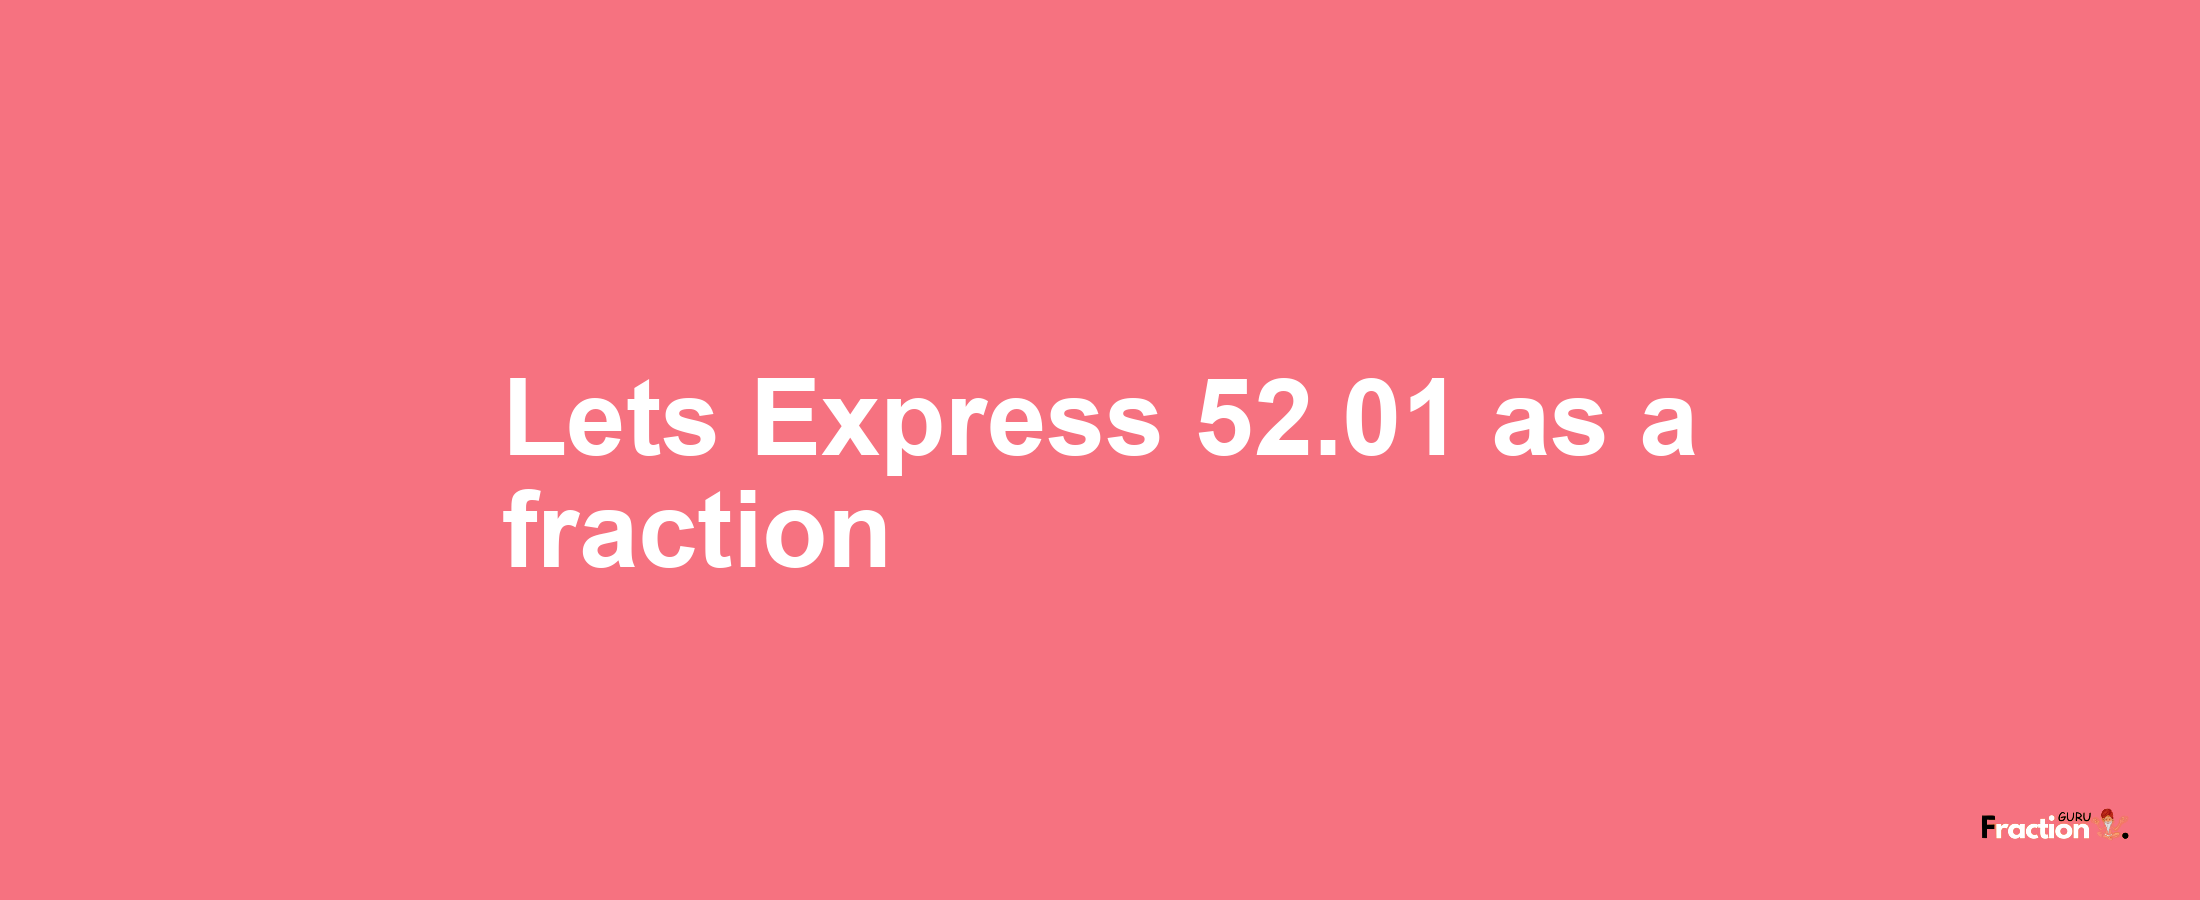 Lets Express 52.01 as afraction